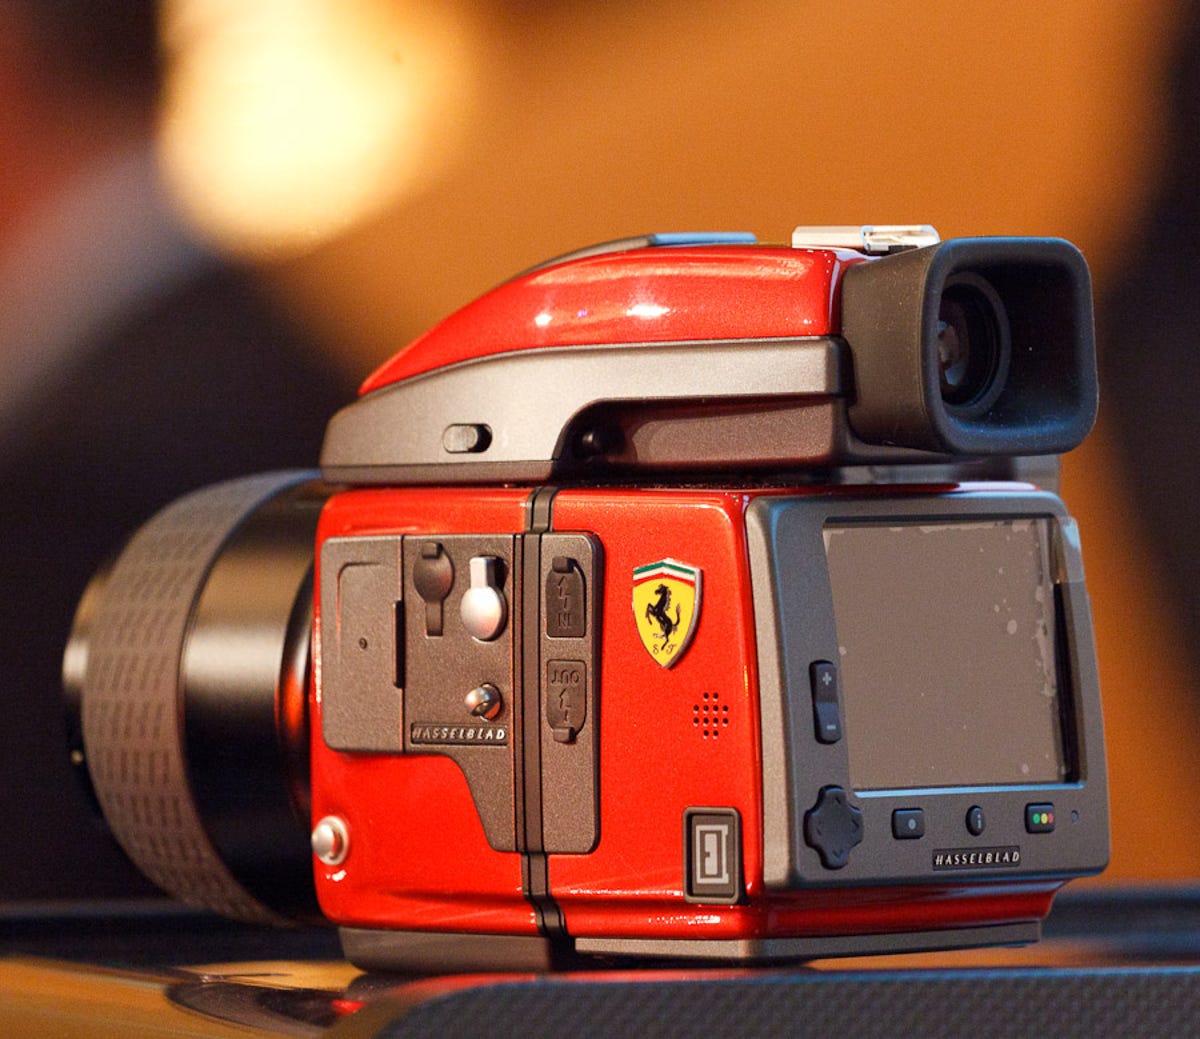 Hasselblad, a high-end camera maker on the mend after rough and unprofitable years, showed off this one of 499 special Ferrari-branded H4D medium-format cameras at the Photokina show in 2010.